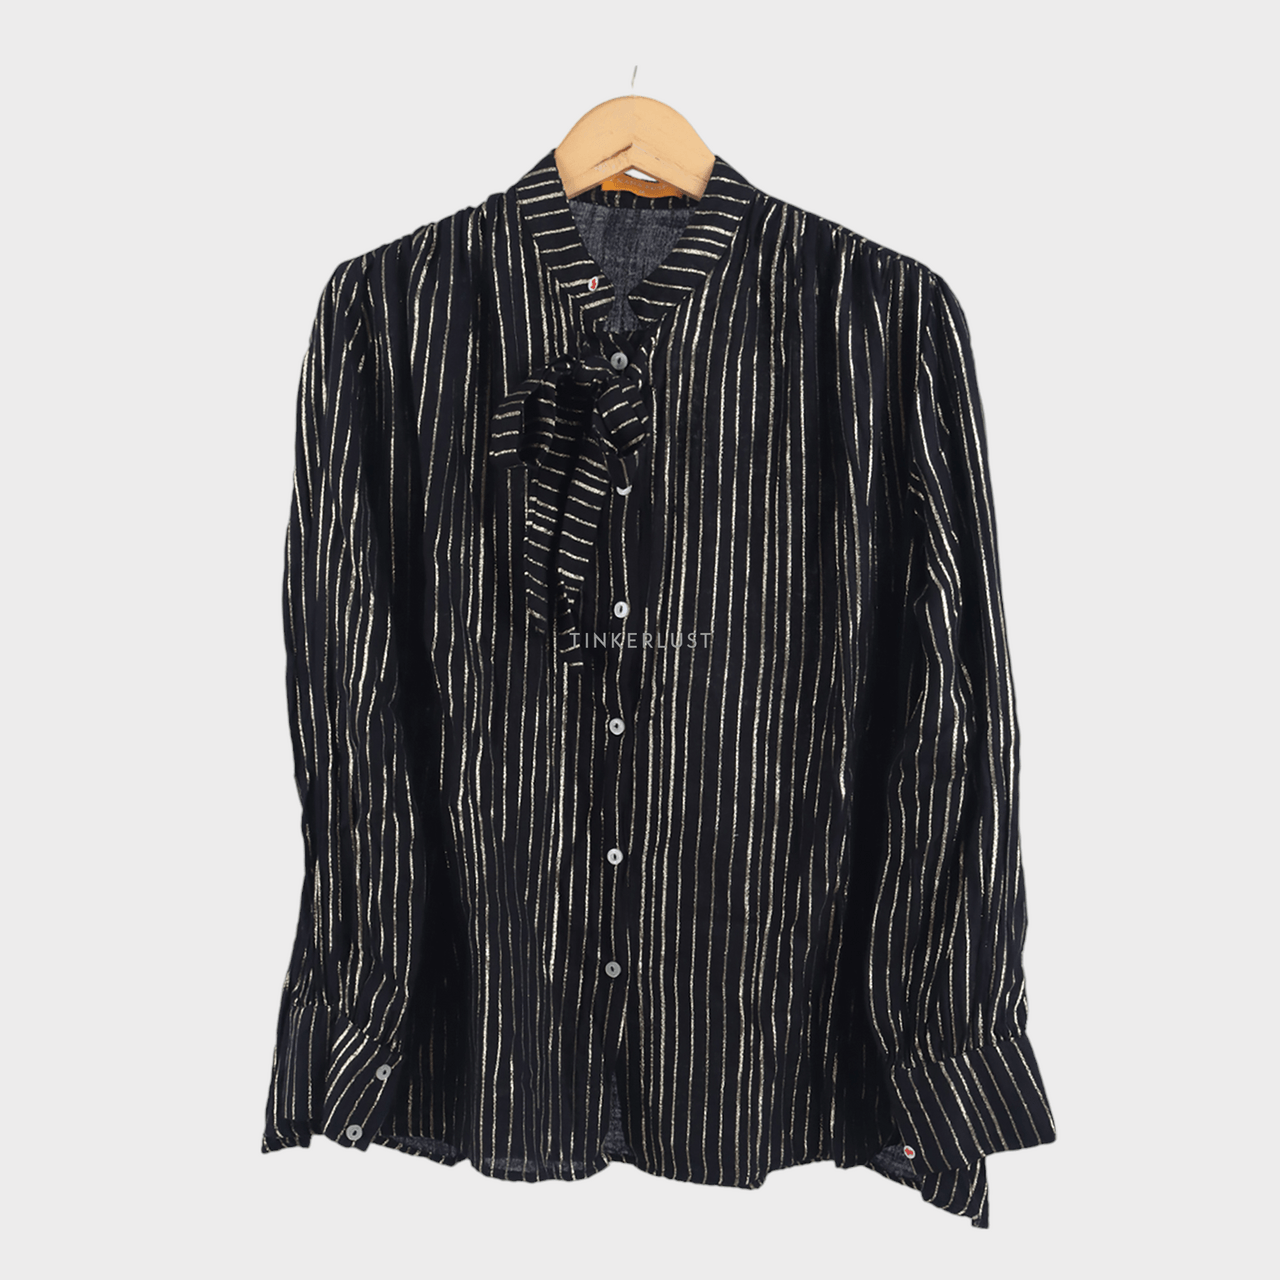 Private Collection Gold & Black Shirt